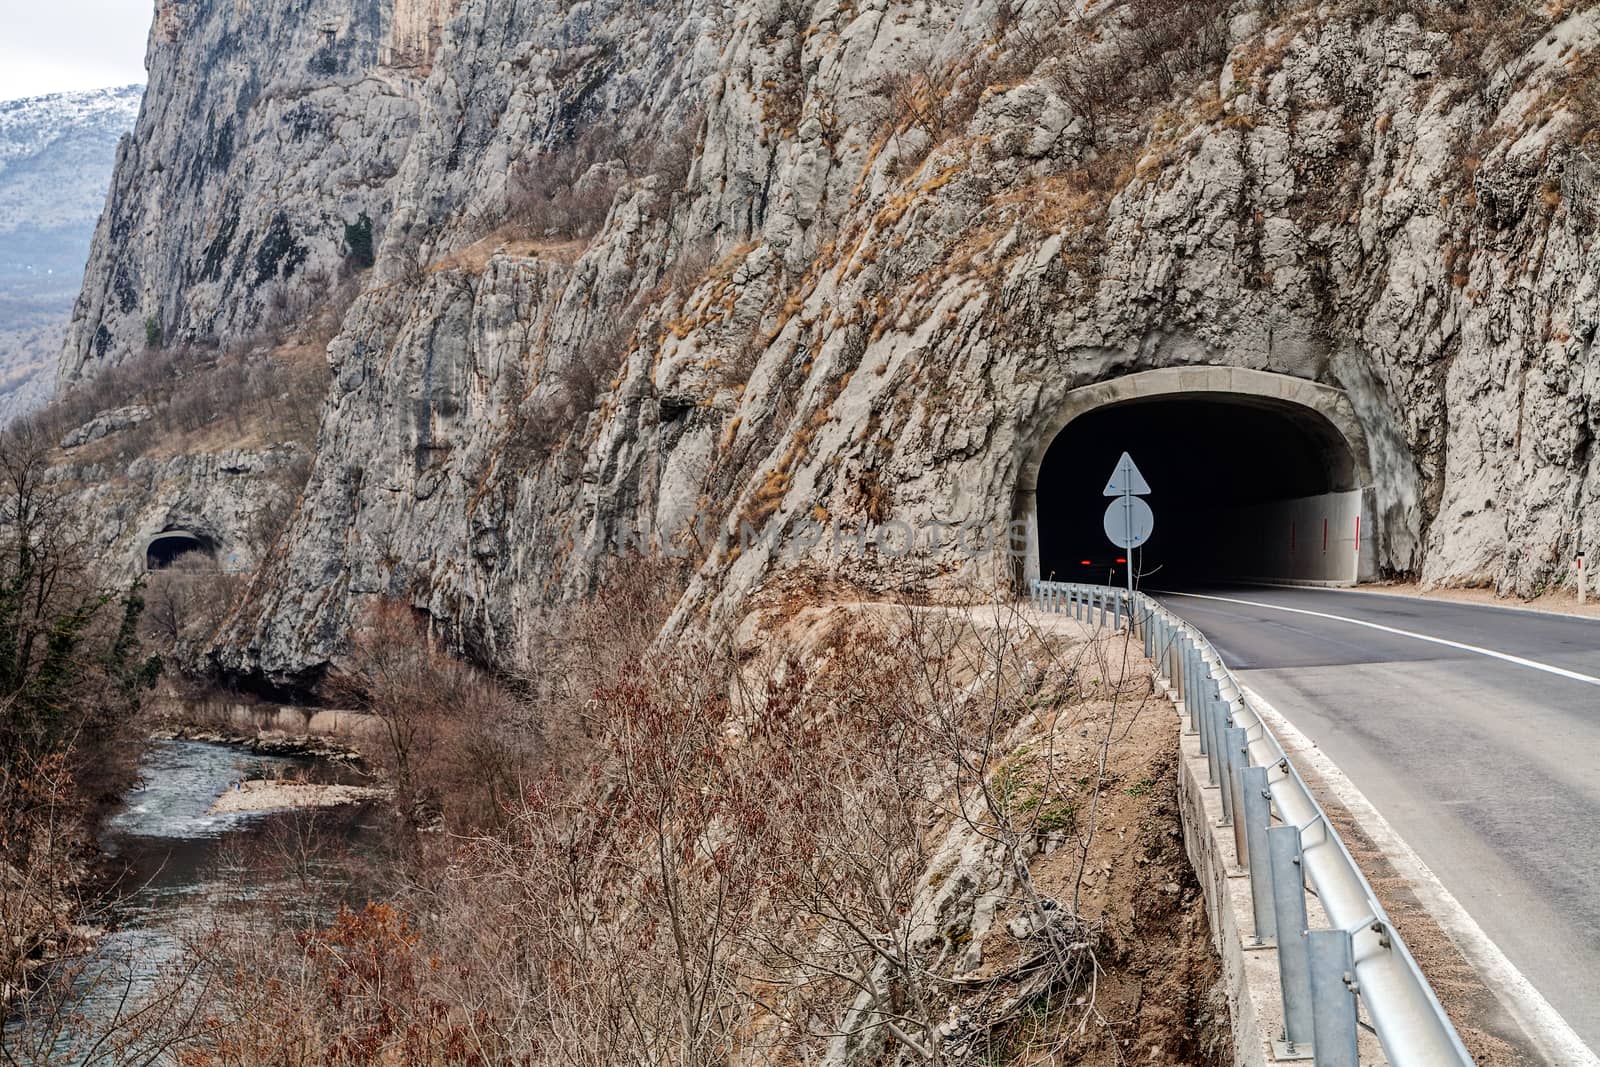 Tunnel on the road in the canyon by vladimirnenezic